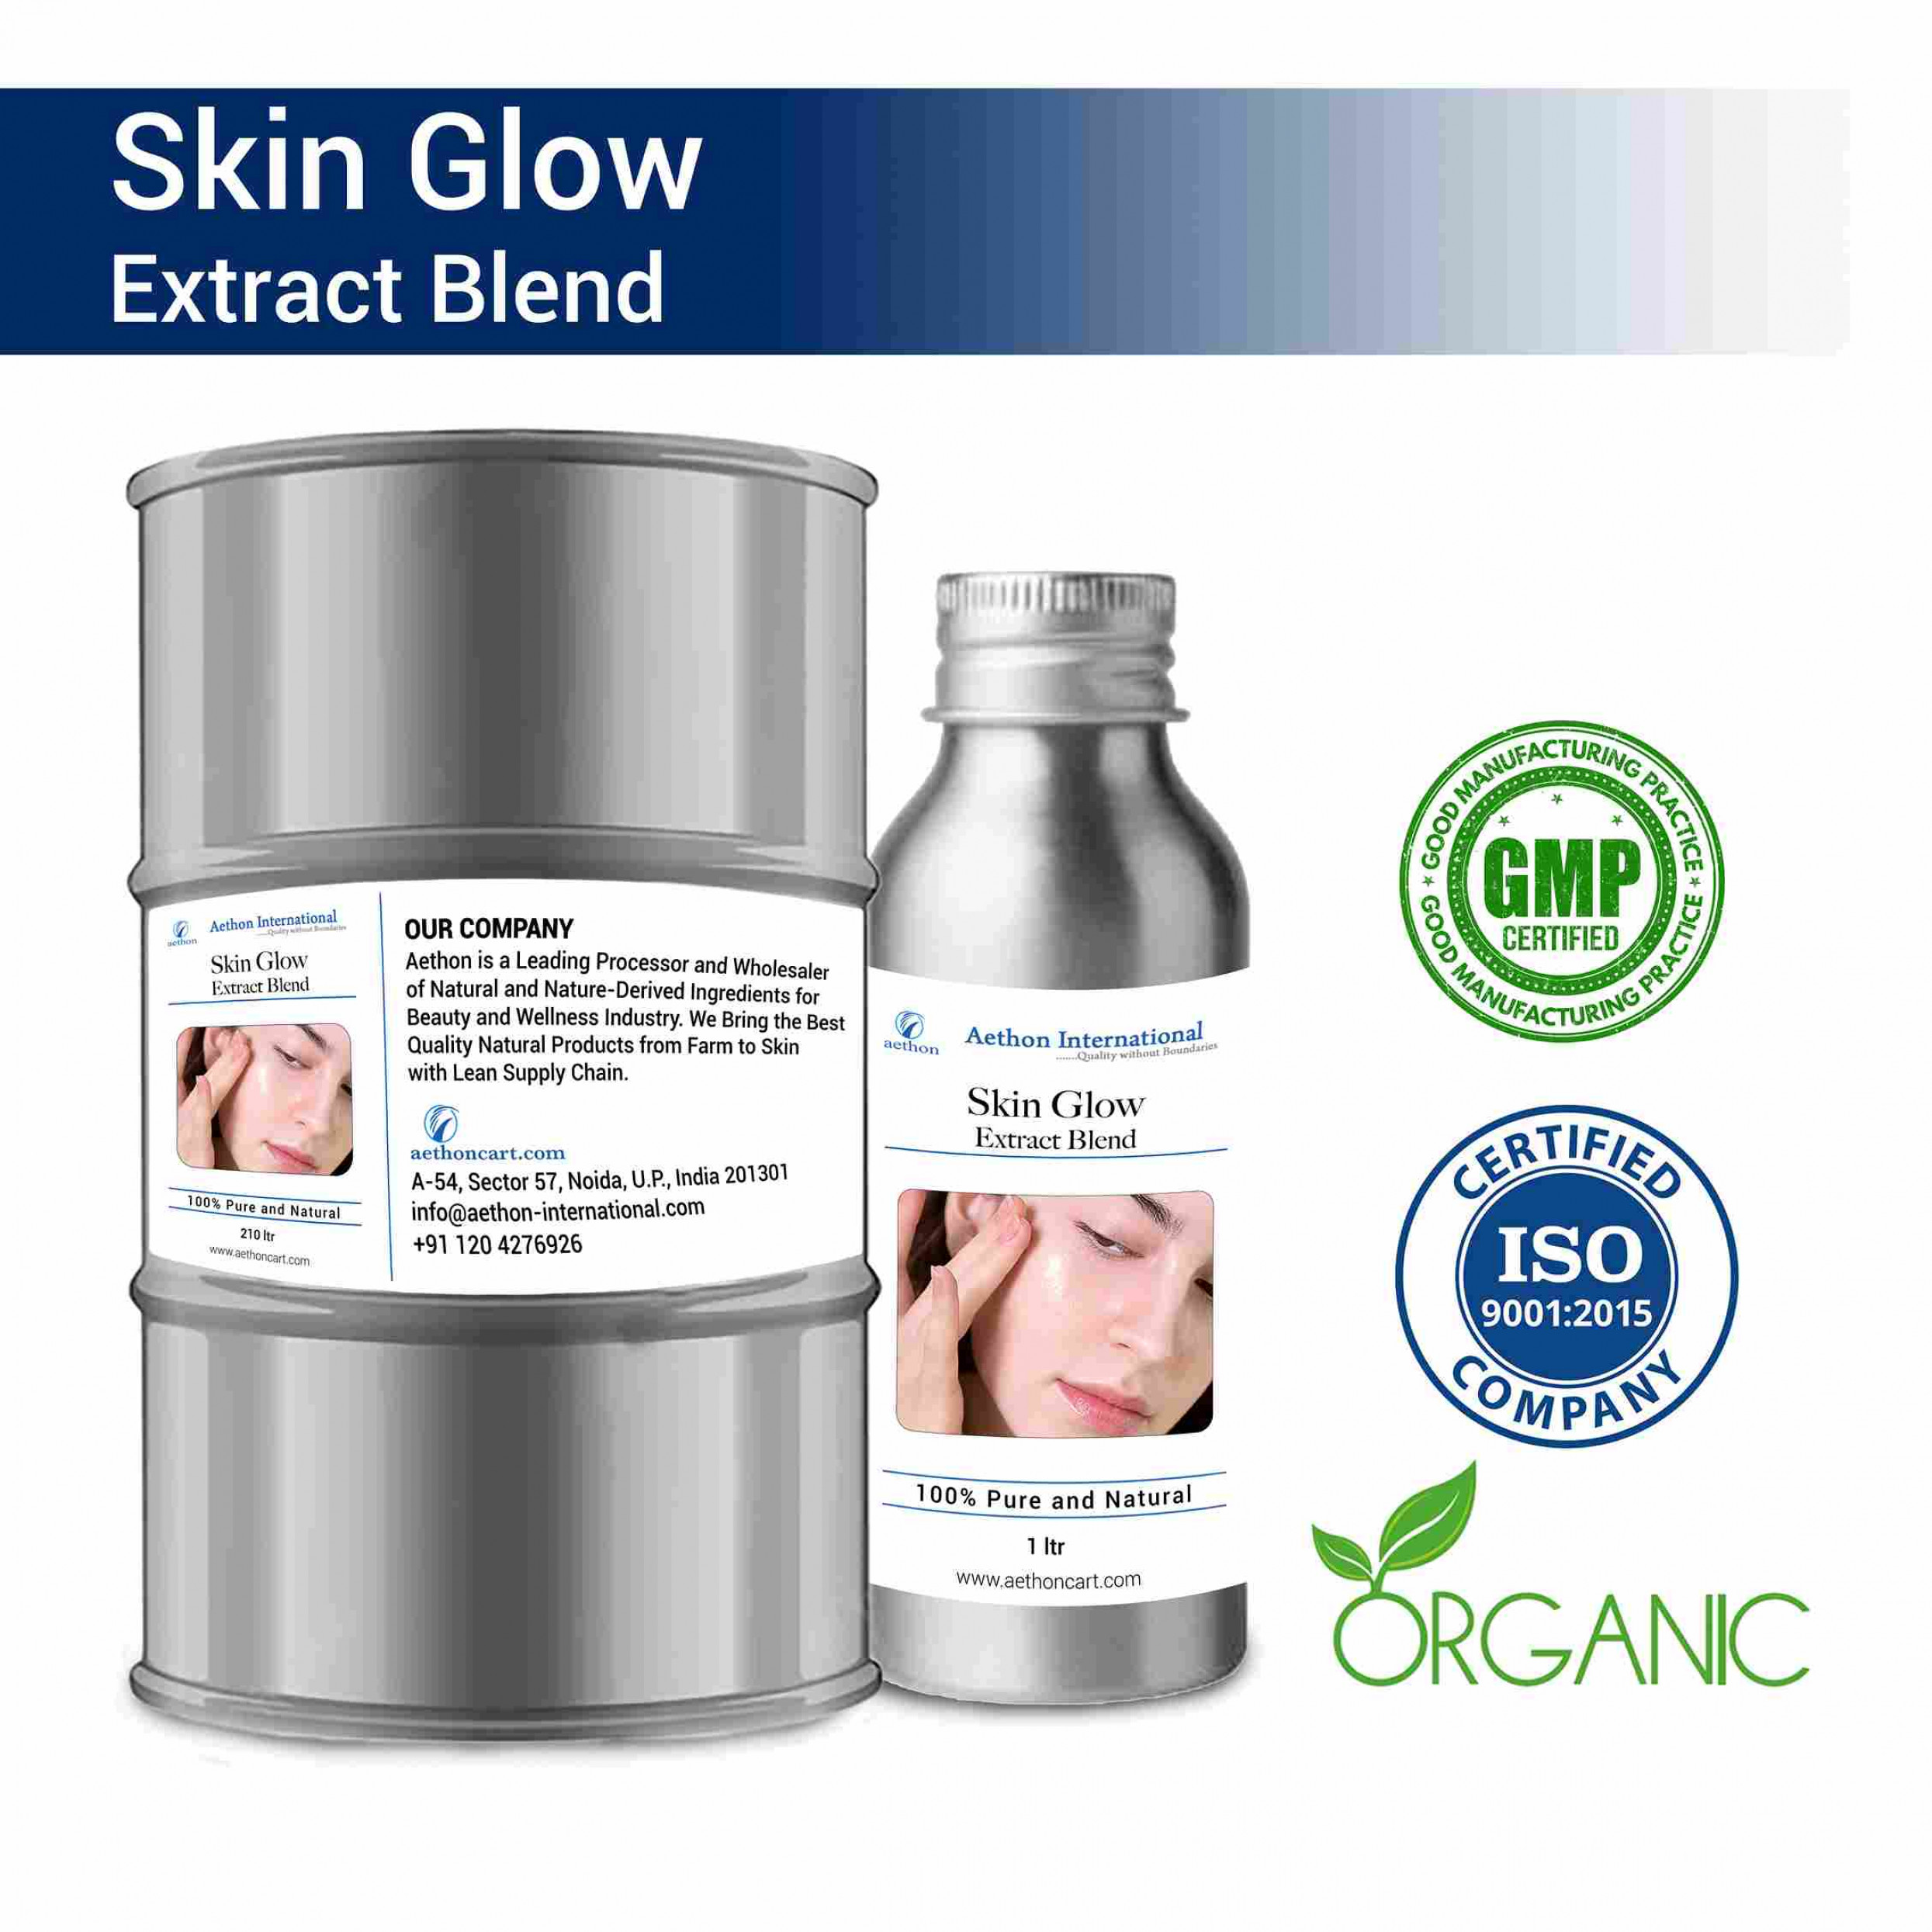 Skin Glow Extract Blend (Oil)